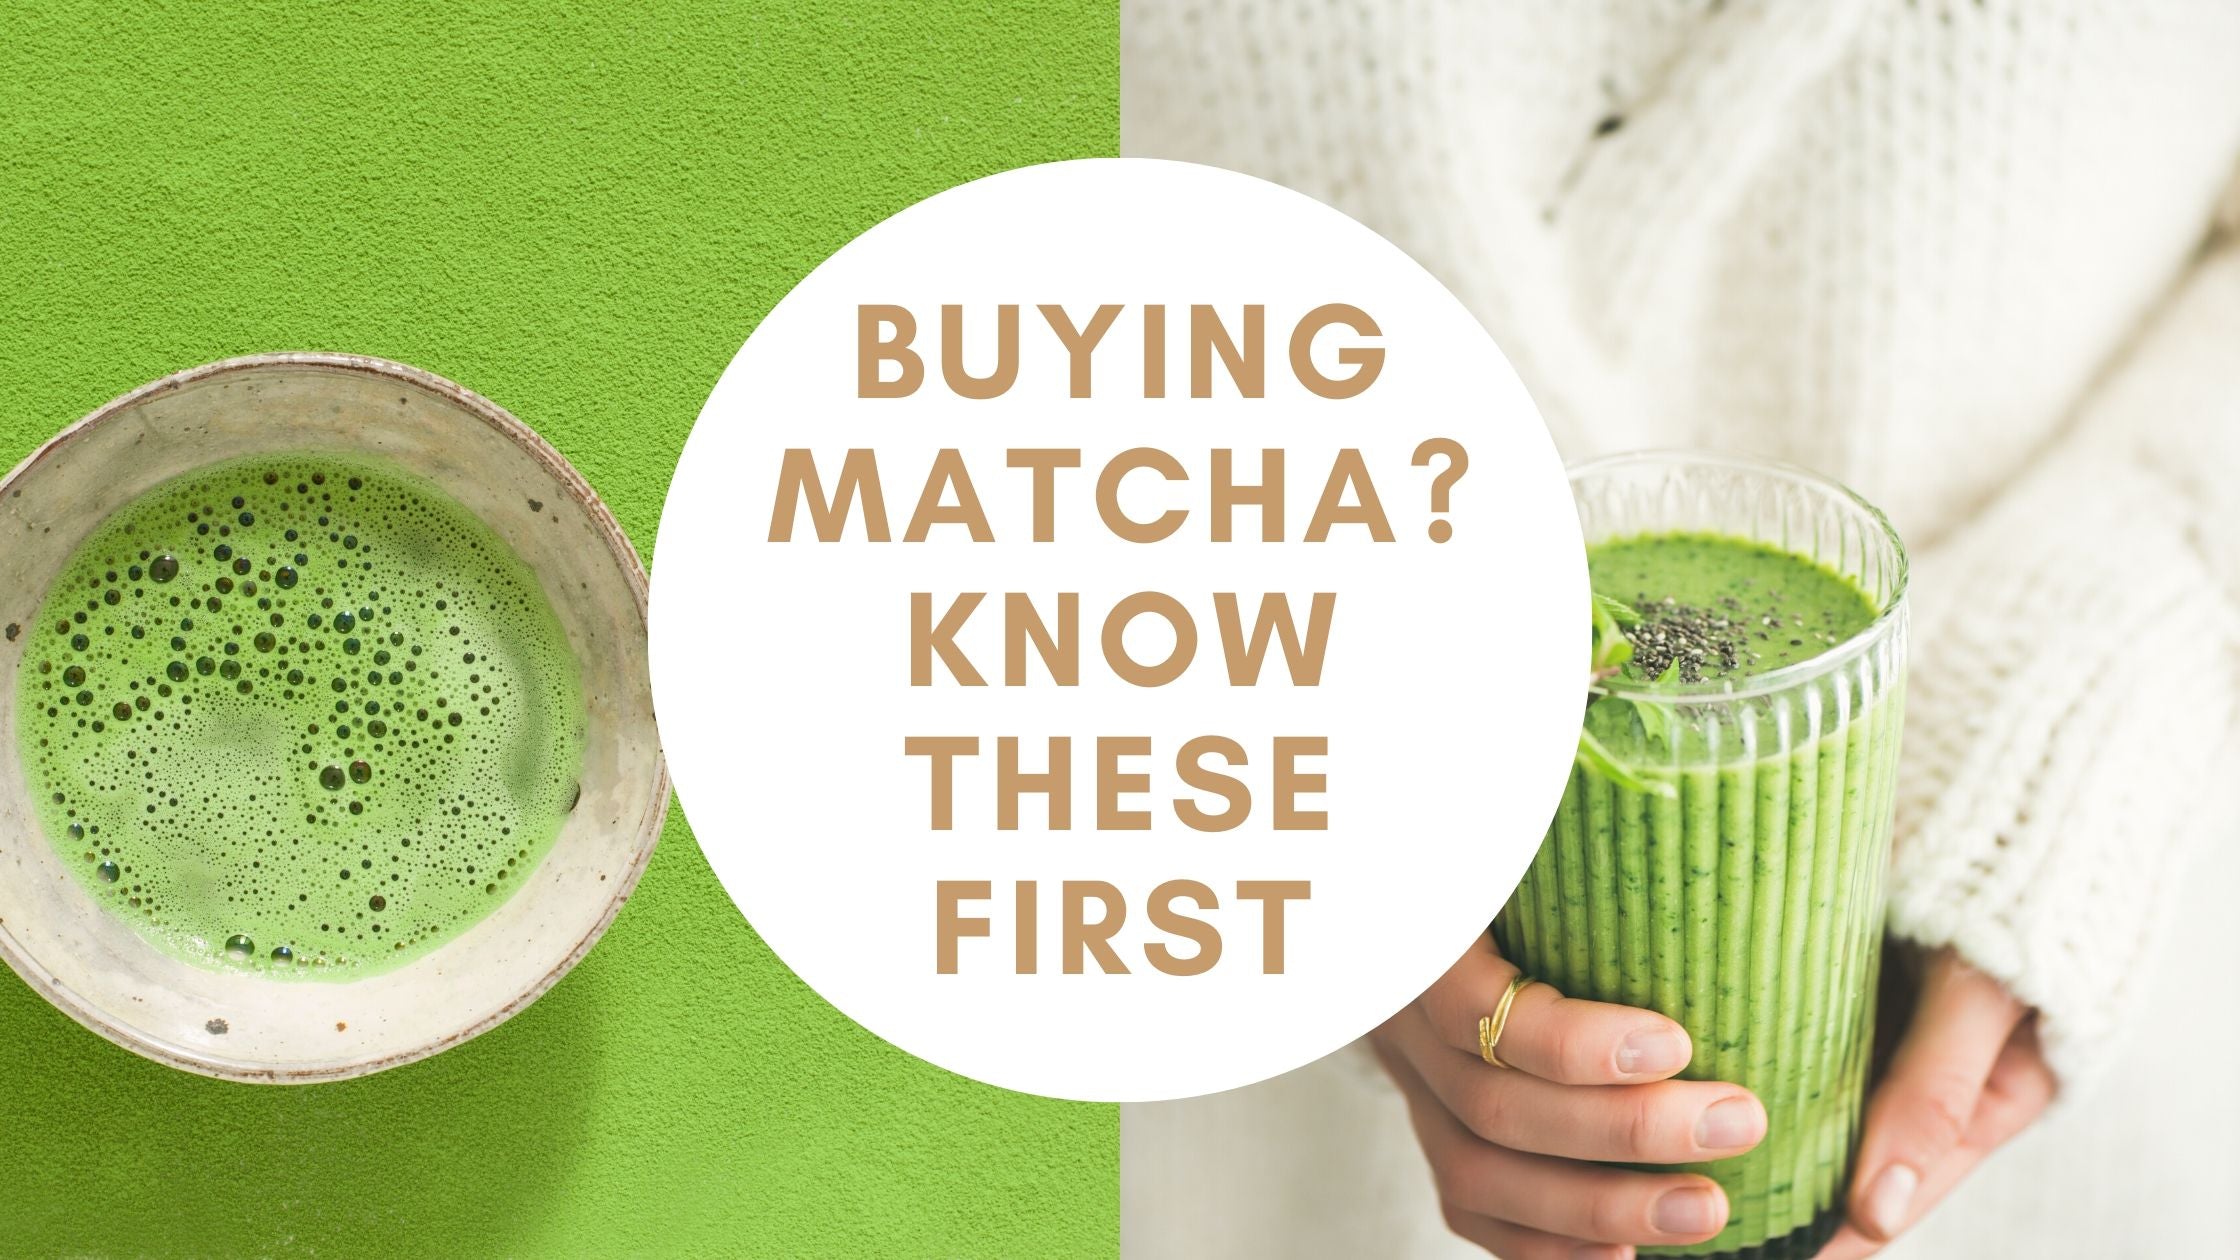 Everything You Need to Consider When Buying Matcha